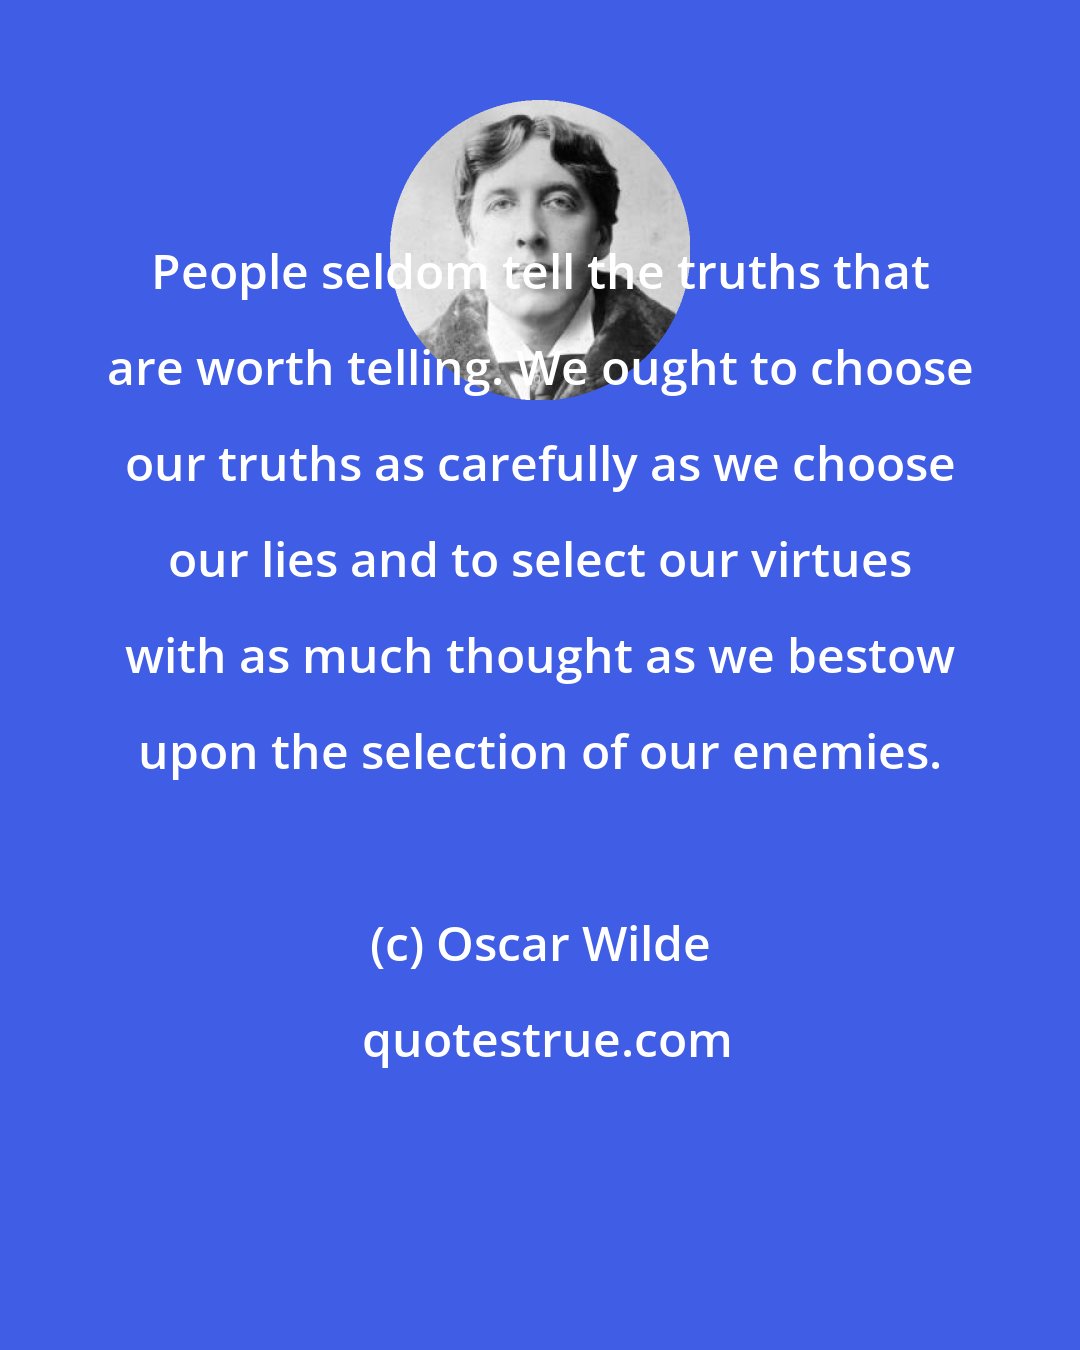 Oscar Wilde: People seldom tell the truths that are worth telling. We ought to choose our truths as carefully as we choose our lies and to select our virtues with as much thought as we bestow upon the selection of our enemies.